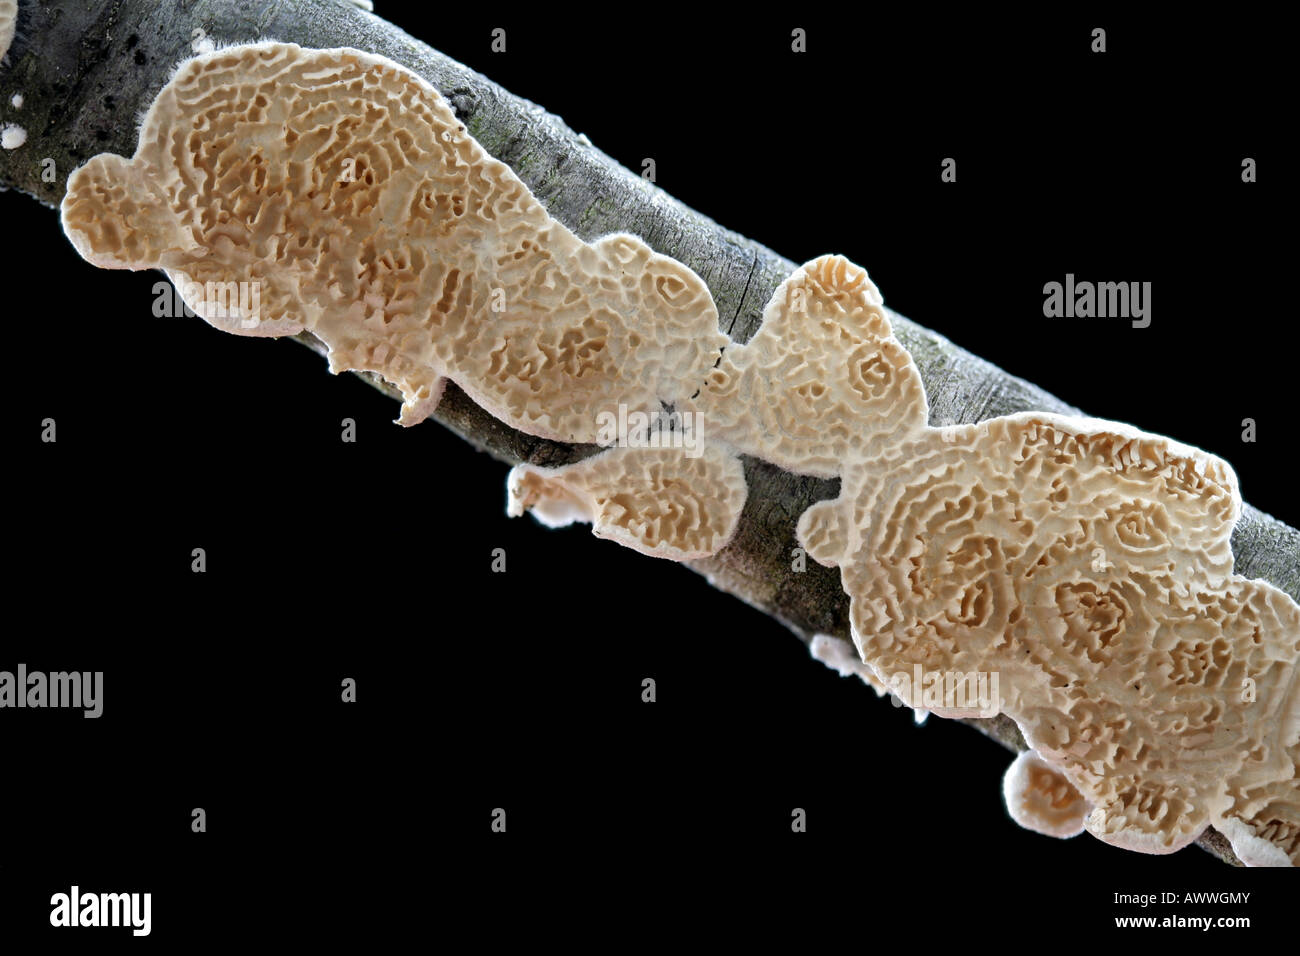 A fungus, Irpex lacteus,  growing on a stick. Stock Photo